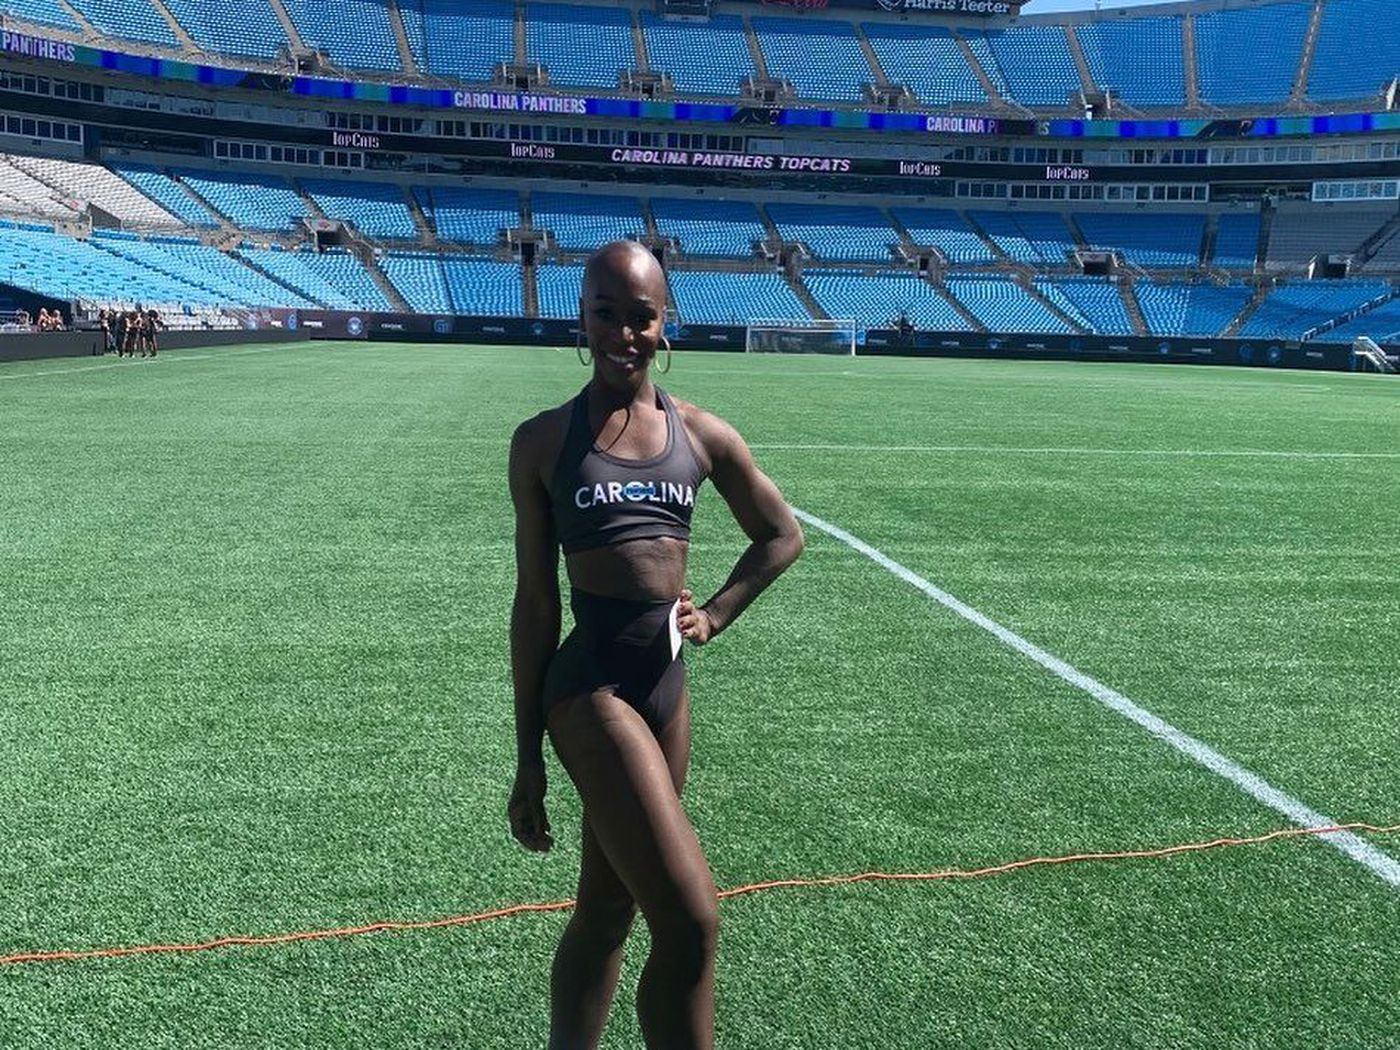 de múltiples fines Diplomático cráneo Carolina Panthers hire NFL's first trans cheerleader - Outsports